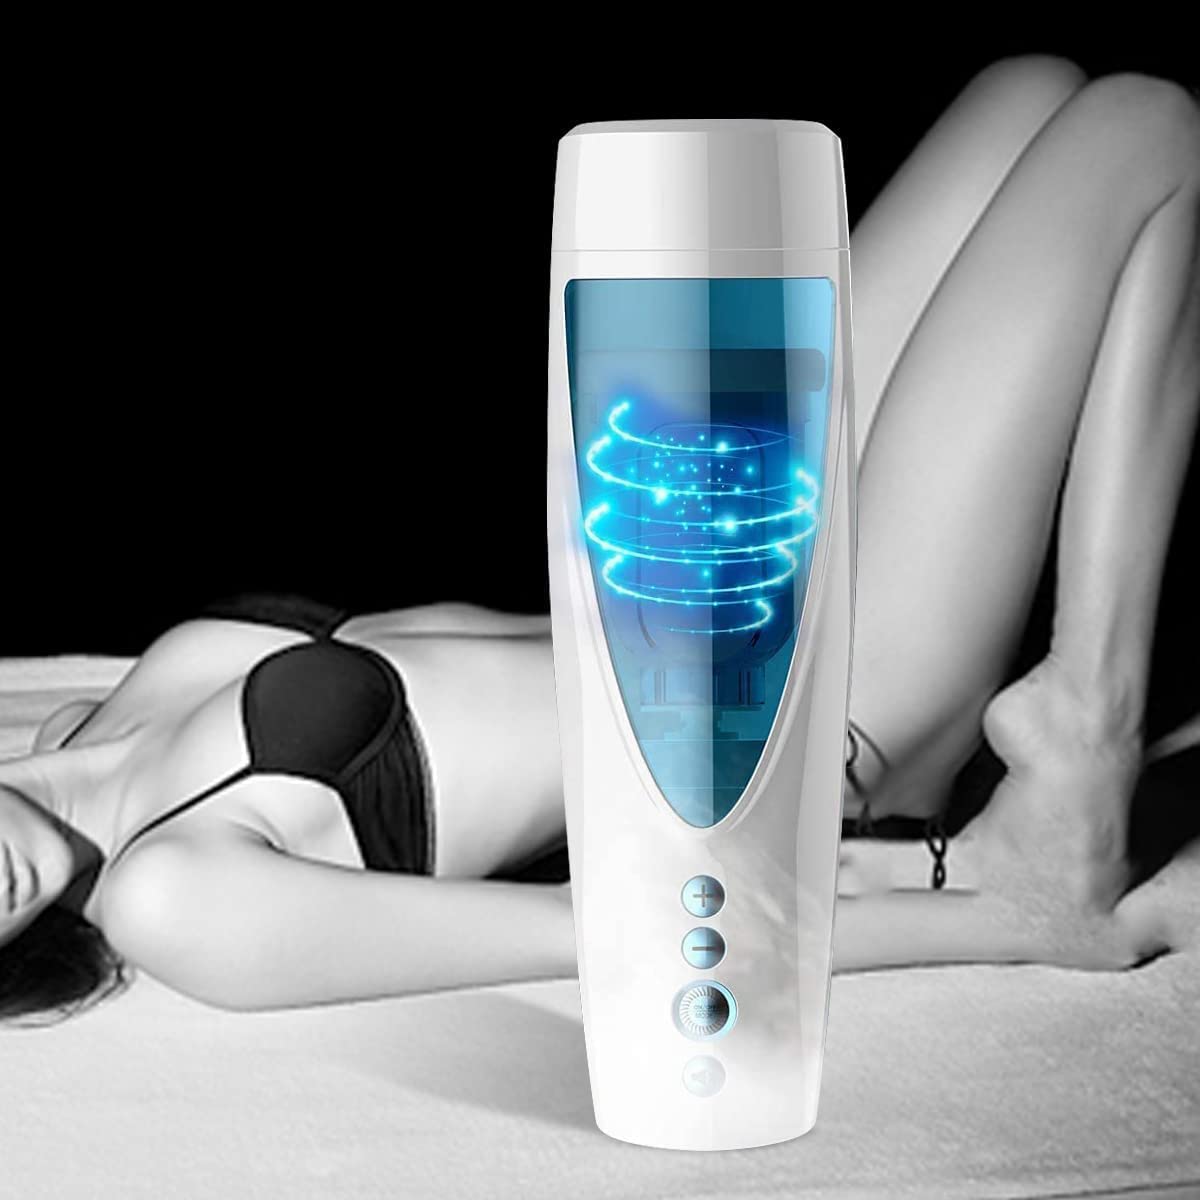 Sex Toys for Men Vibrating Machine Hands Free - 2021 New Masterbrators for Men Automatic Blówjobséx Máchine for Men Handsfree Modes Sucking USB Rechargeable Sexy Underwear for Men Sleeve Adult Toys - Koawas